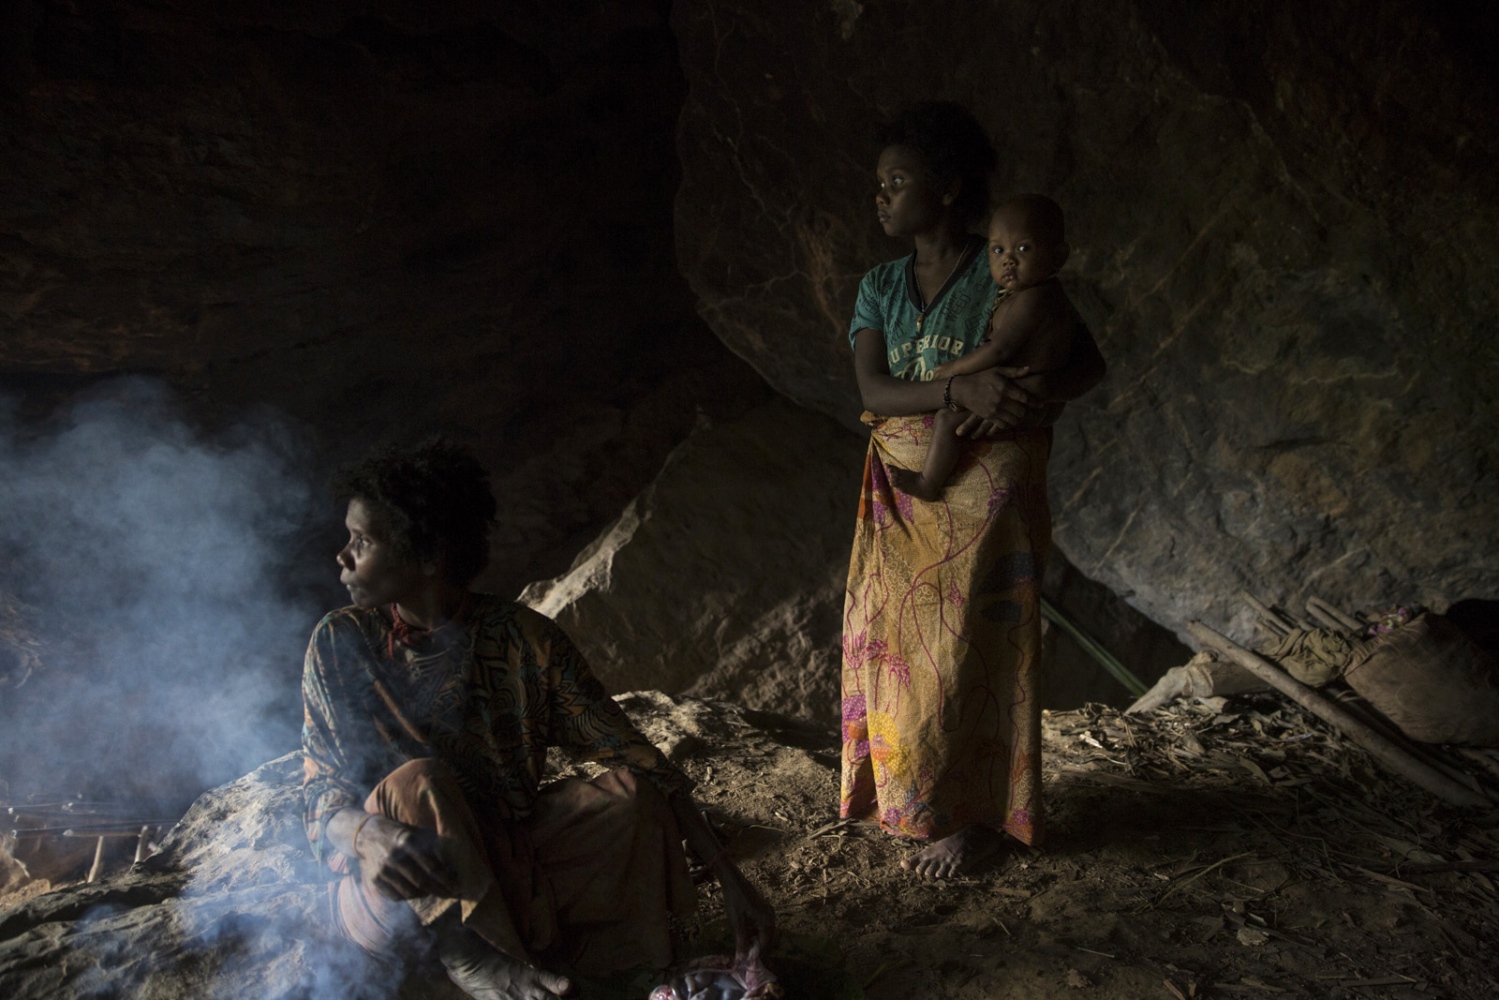 THE MANIQ - A mother and child stand in a cave. During the rainy...